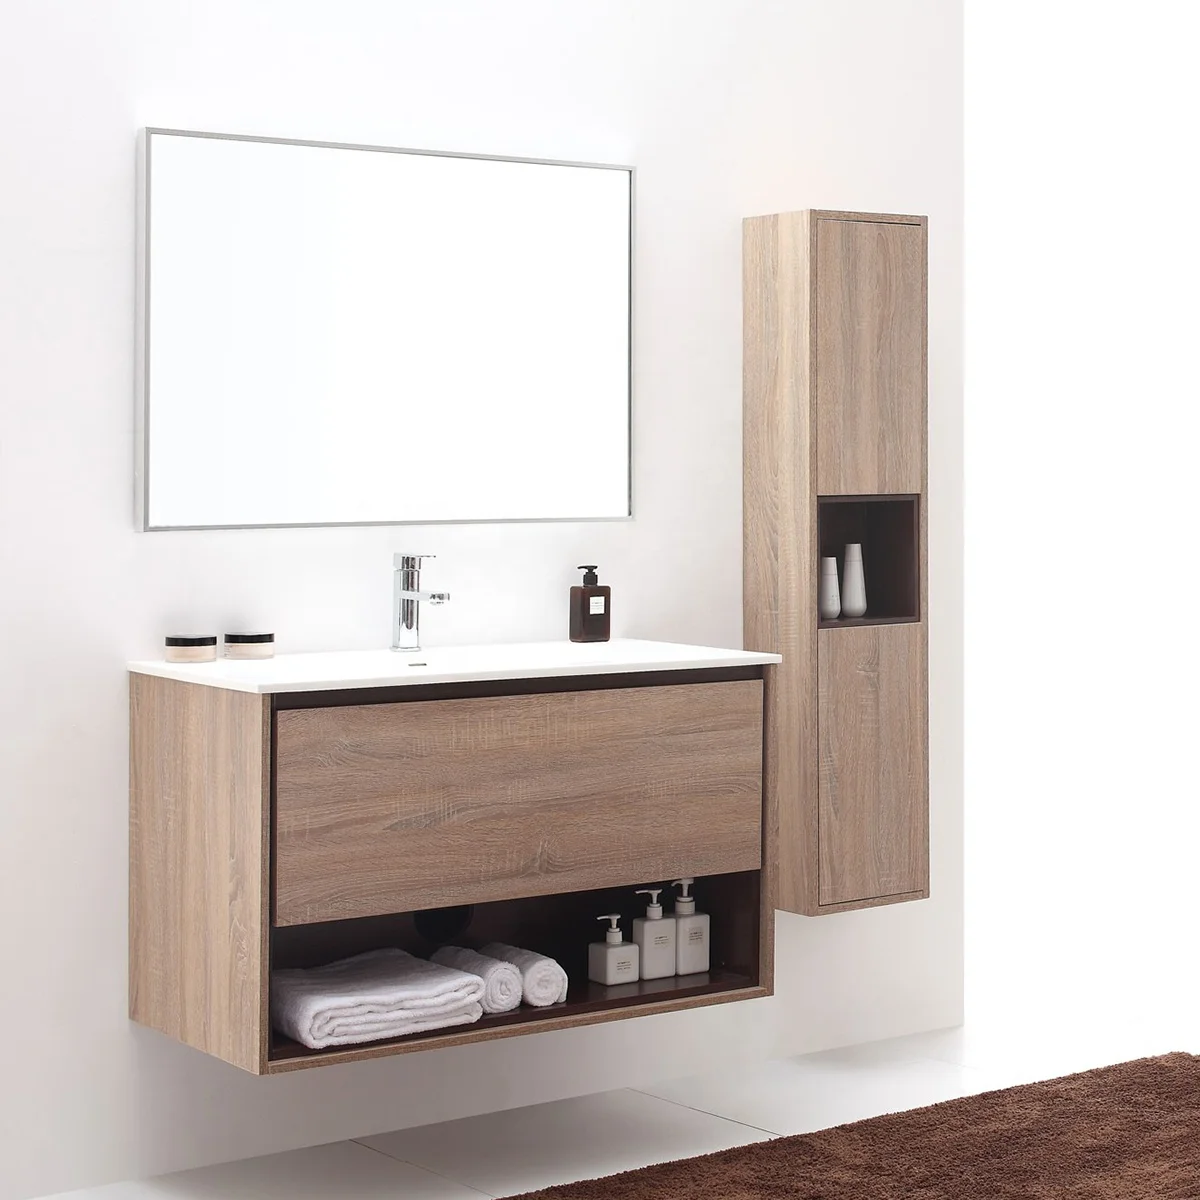 
Mirror+basin+faucets Environmental Friendly cheap single bathroom vanity chinese Customized solid wood classic bathroom cabinet 